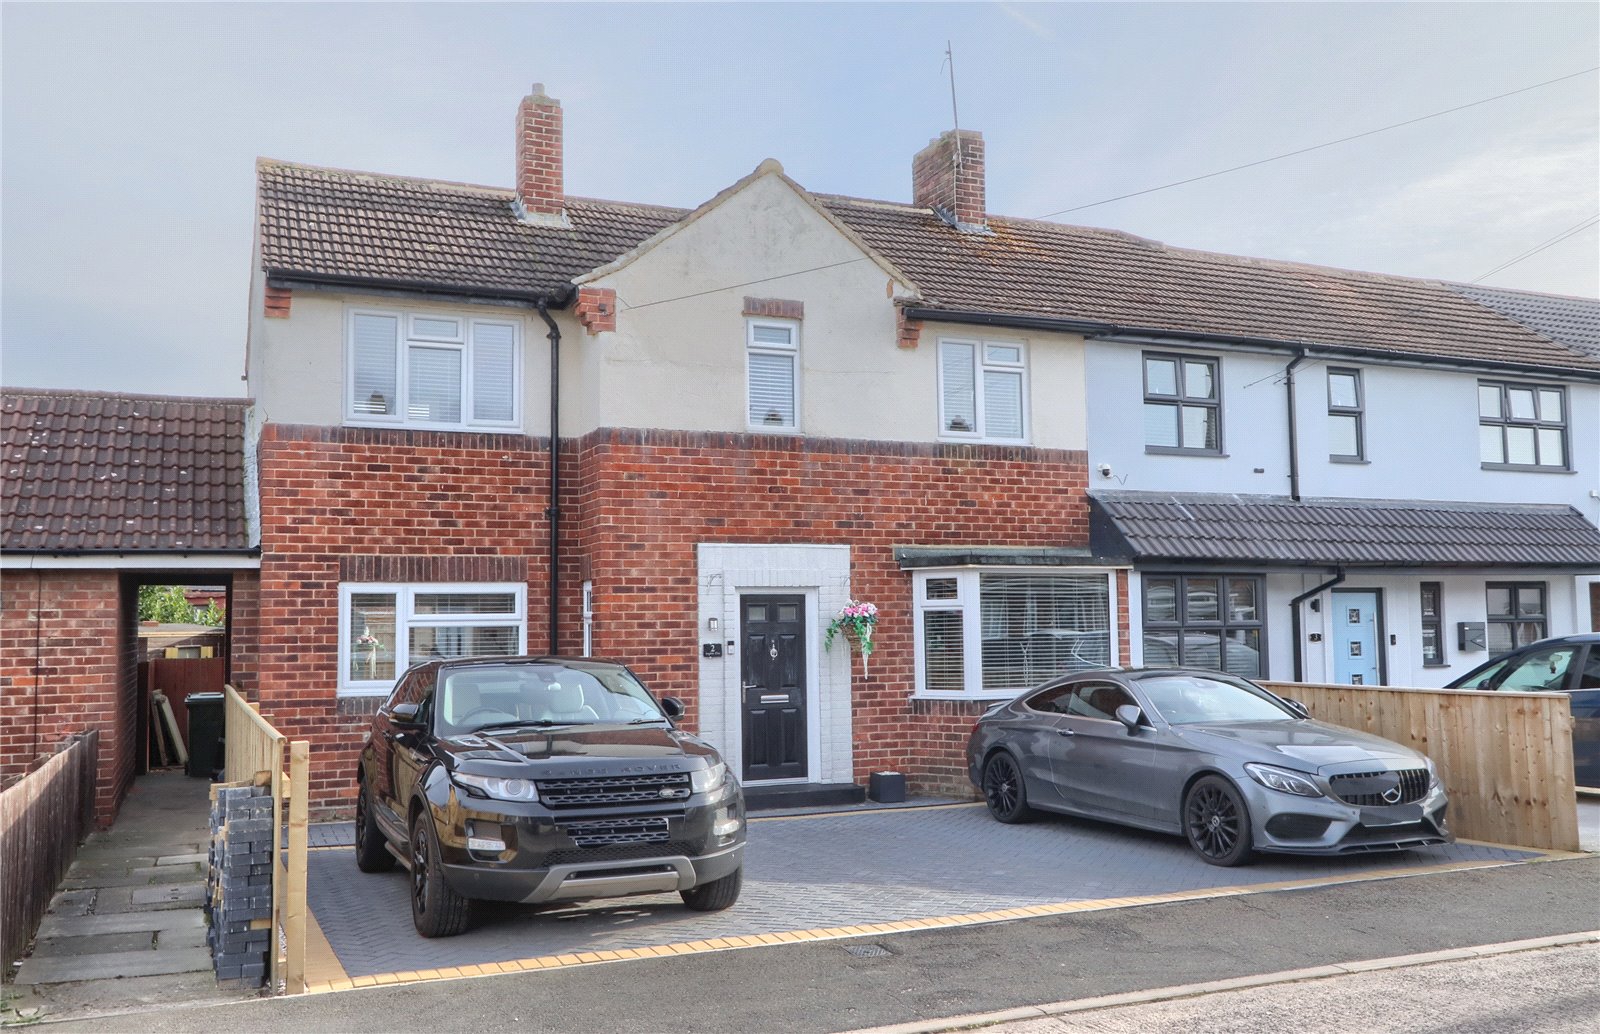 3 bed house for sale in Lingdale Close, Stockton-on-Tees  - Property Image 1